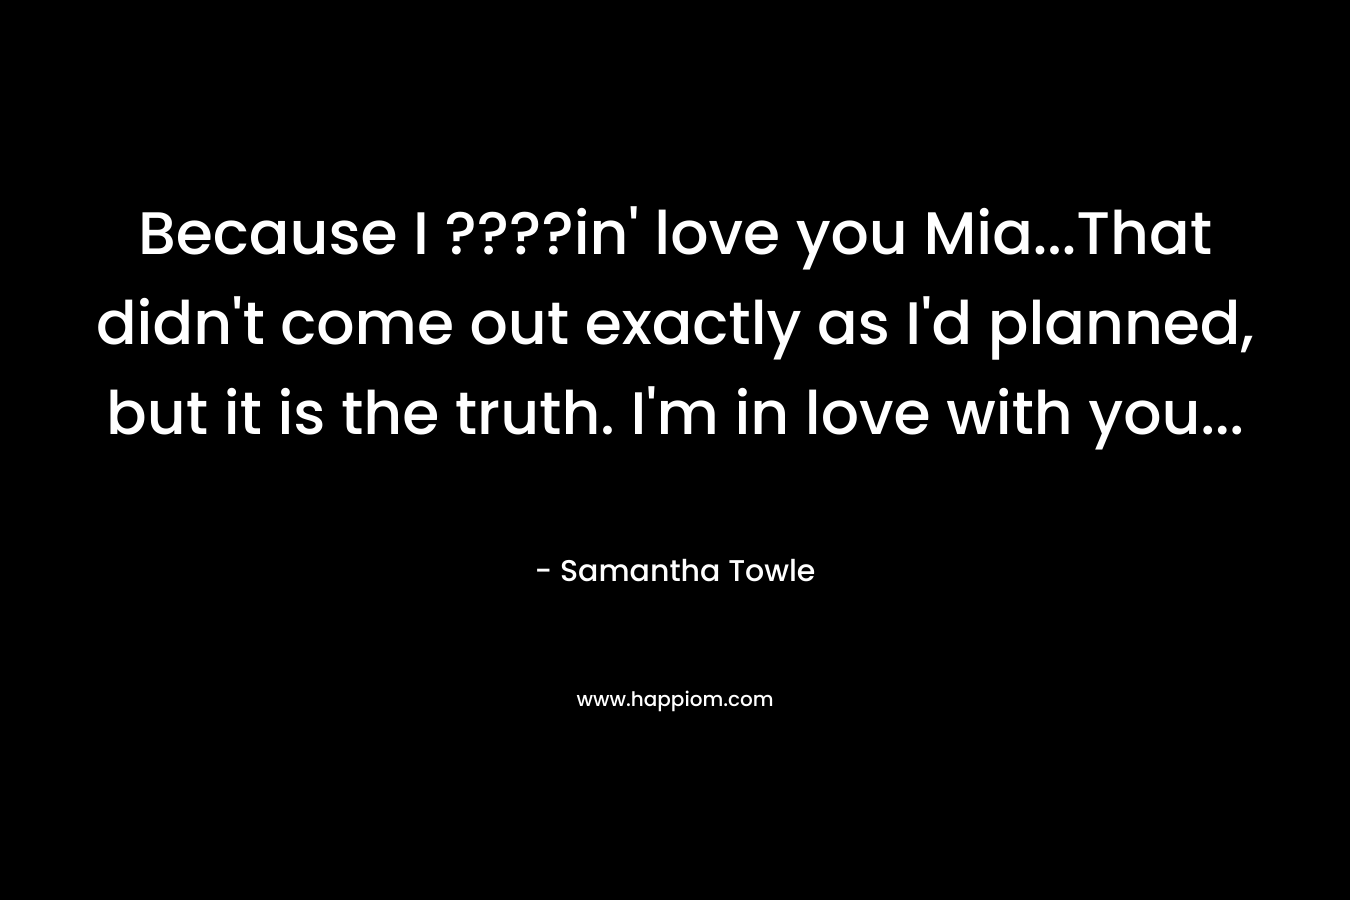 Because I ????in’ love you Mia…That didn’t come out exactly as I’d planned, but it is the truth. I’m in love with you… – Samantha Towle